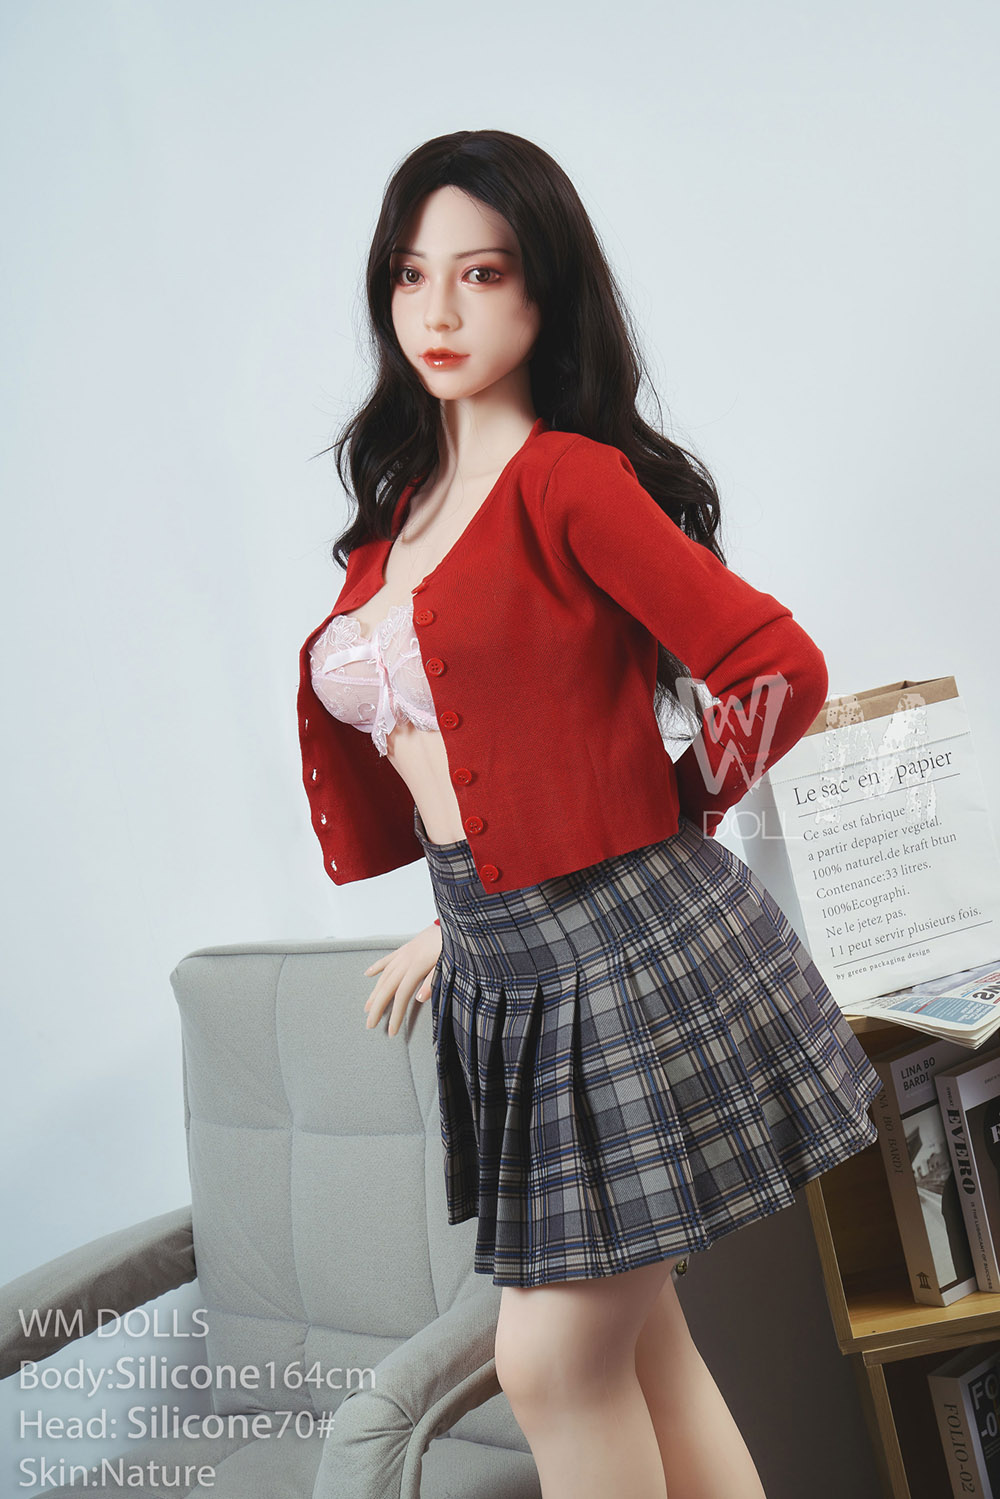  full size wm realdoll married woman with red coat